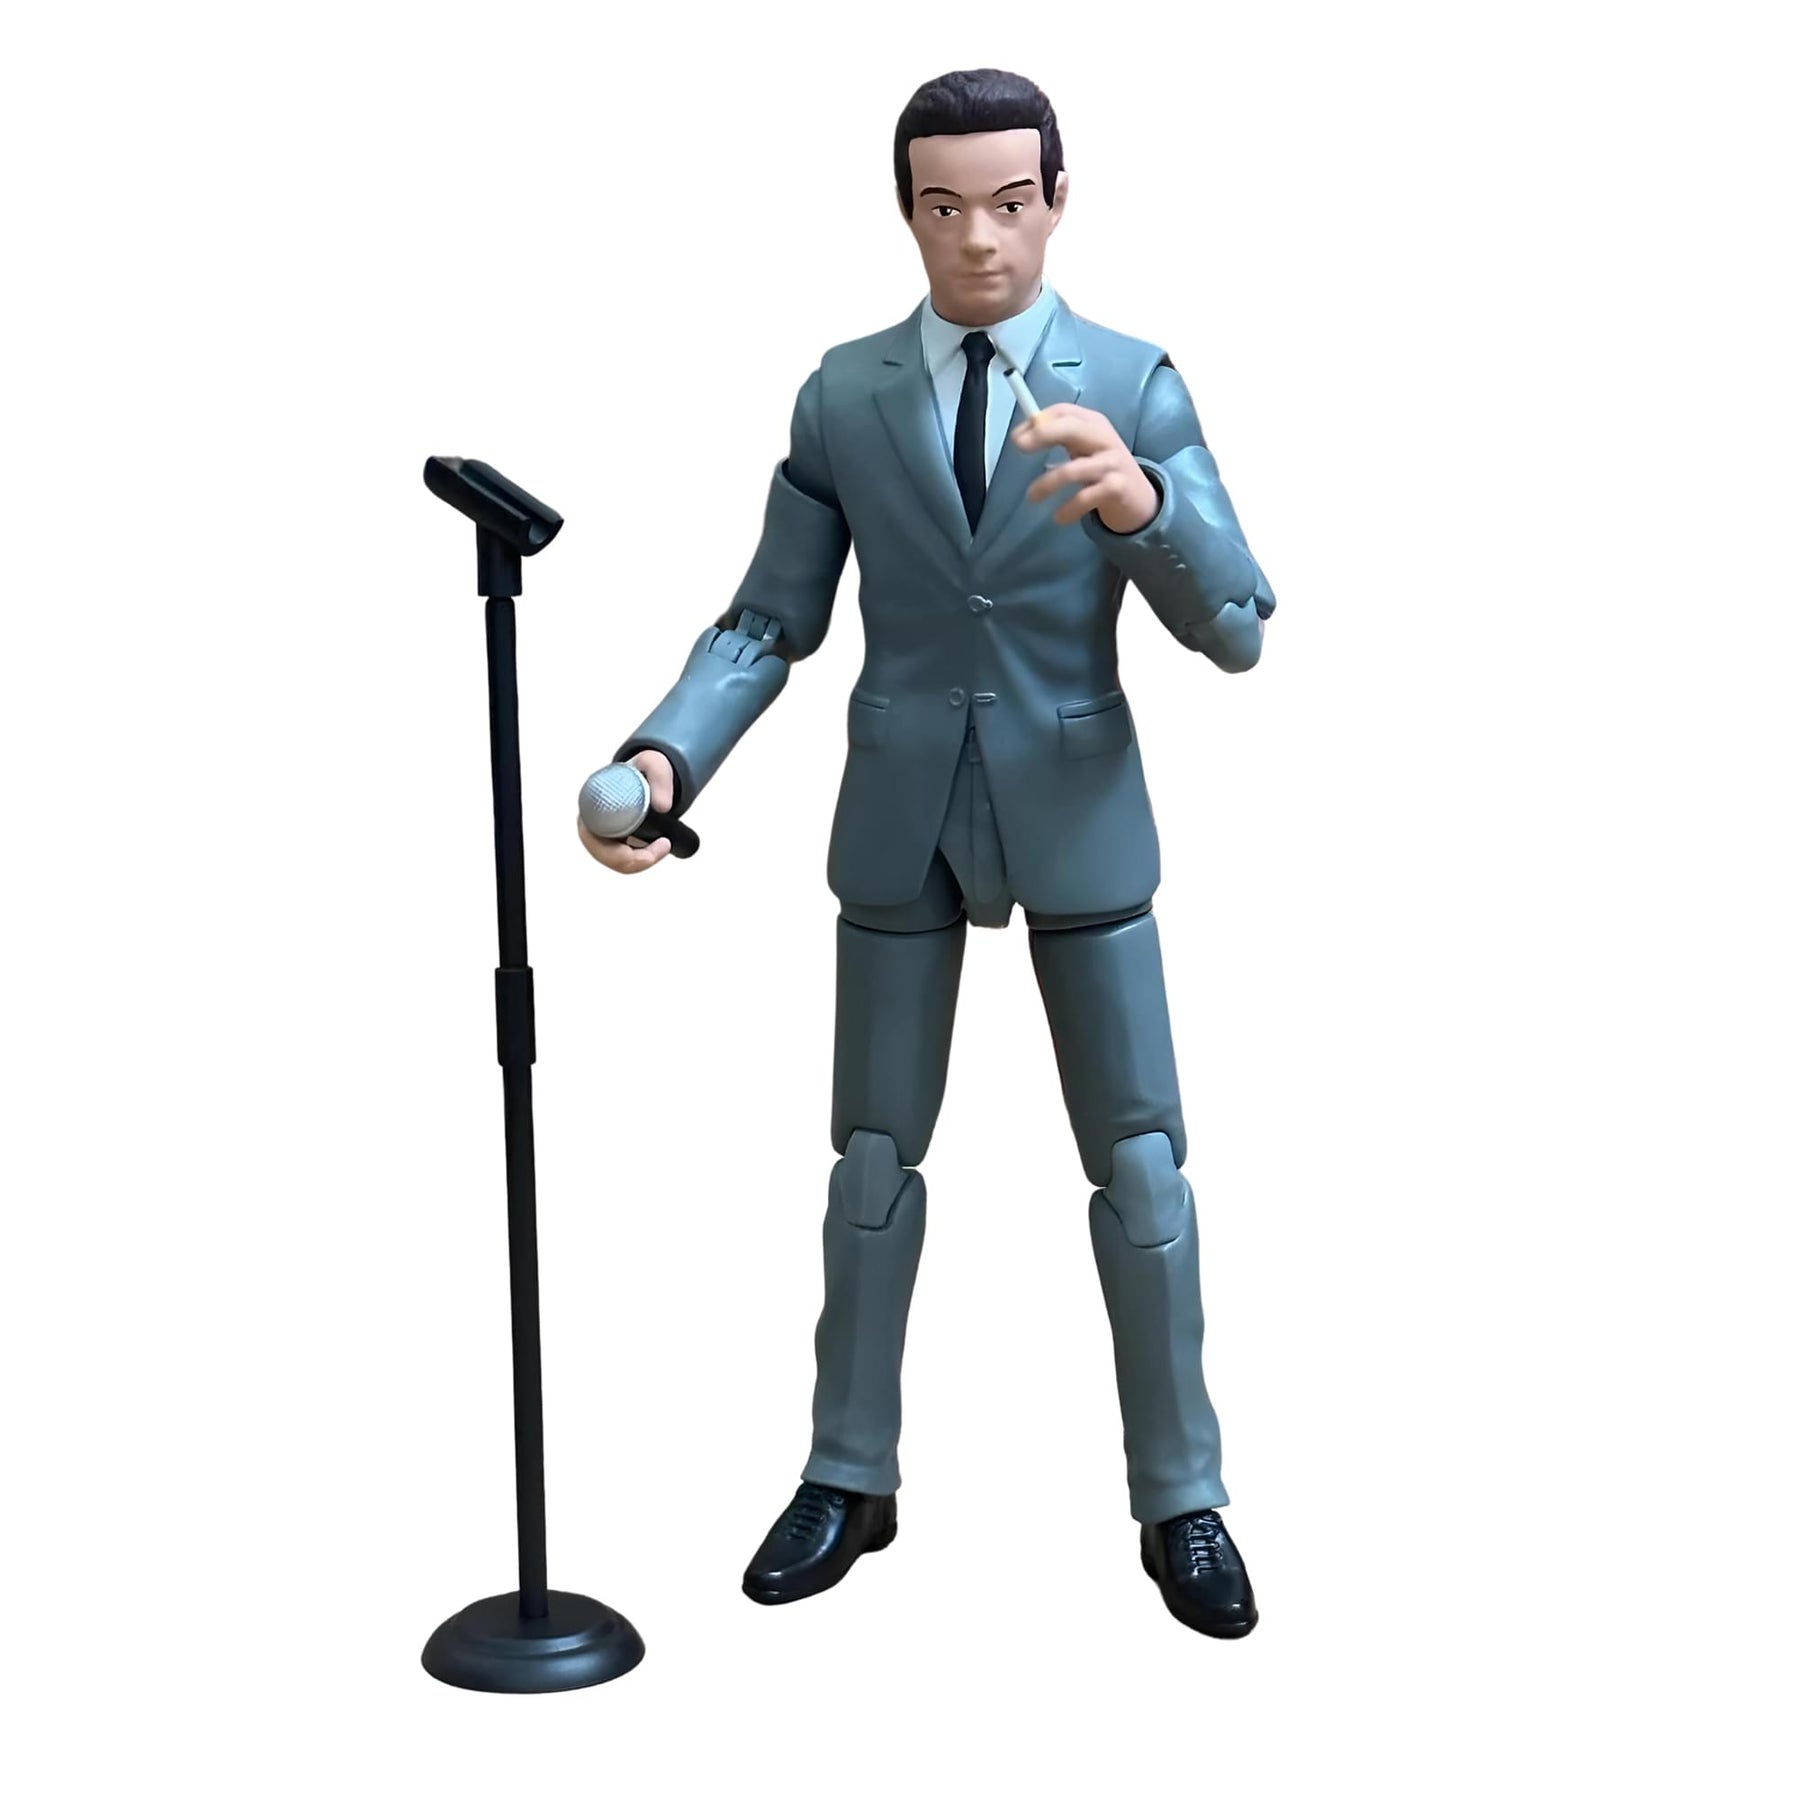 Legends of Laughter 6 Inch Action Figure | Lenny Bruce